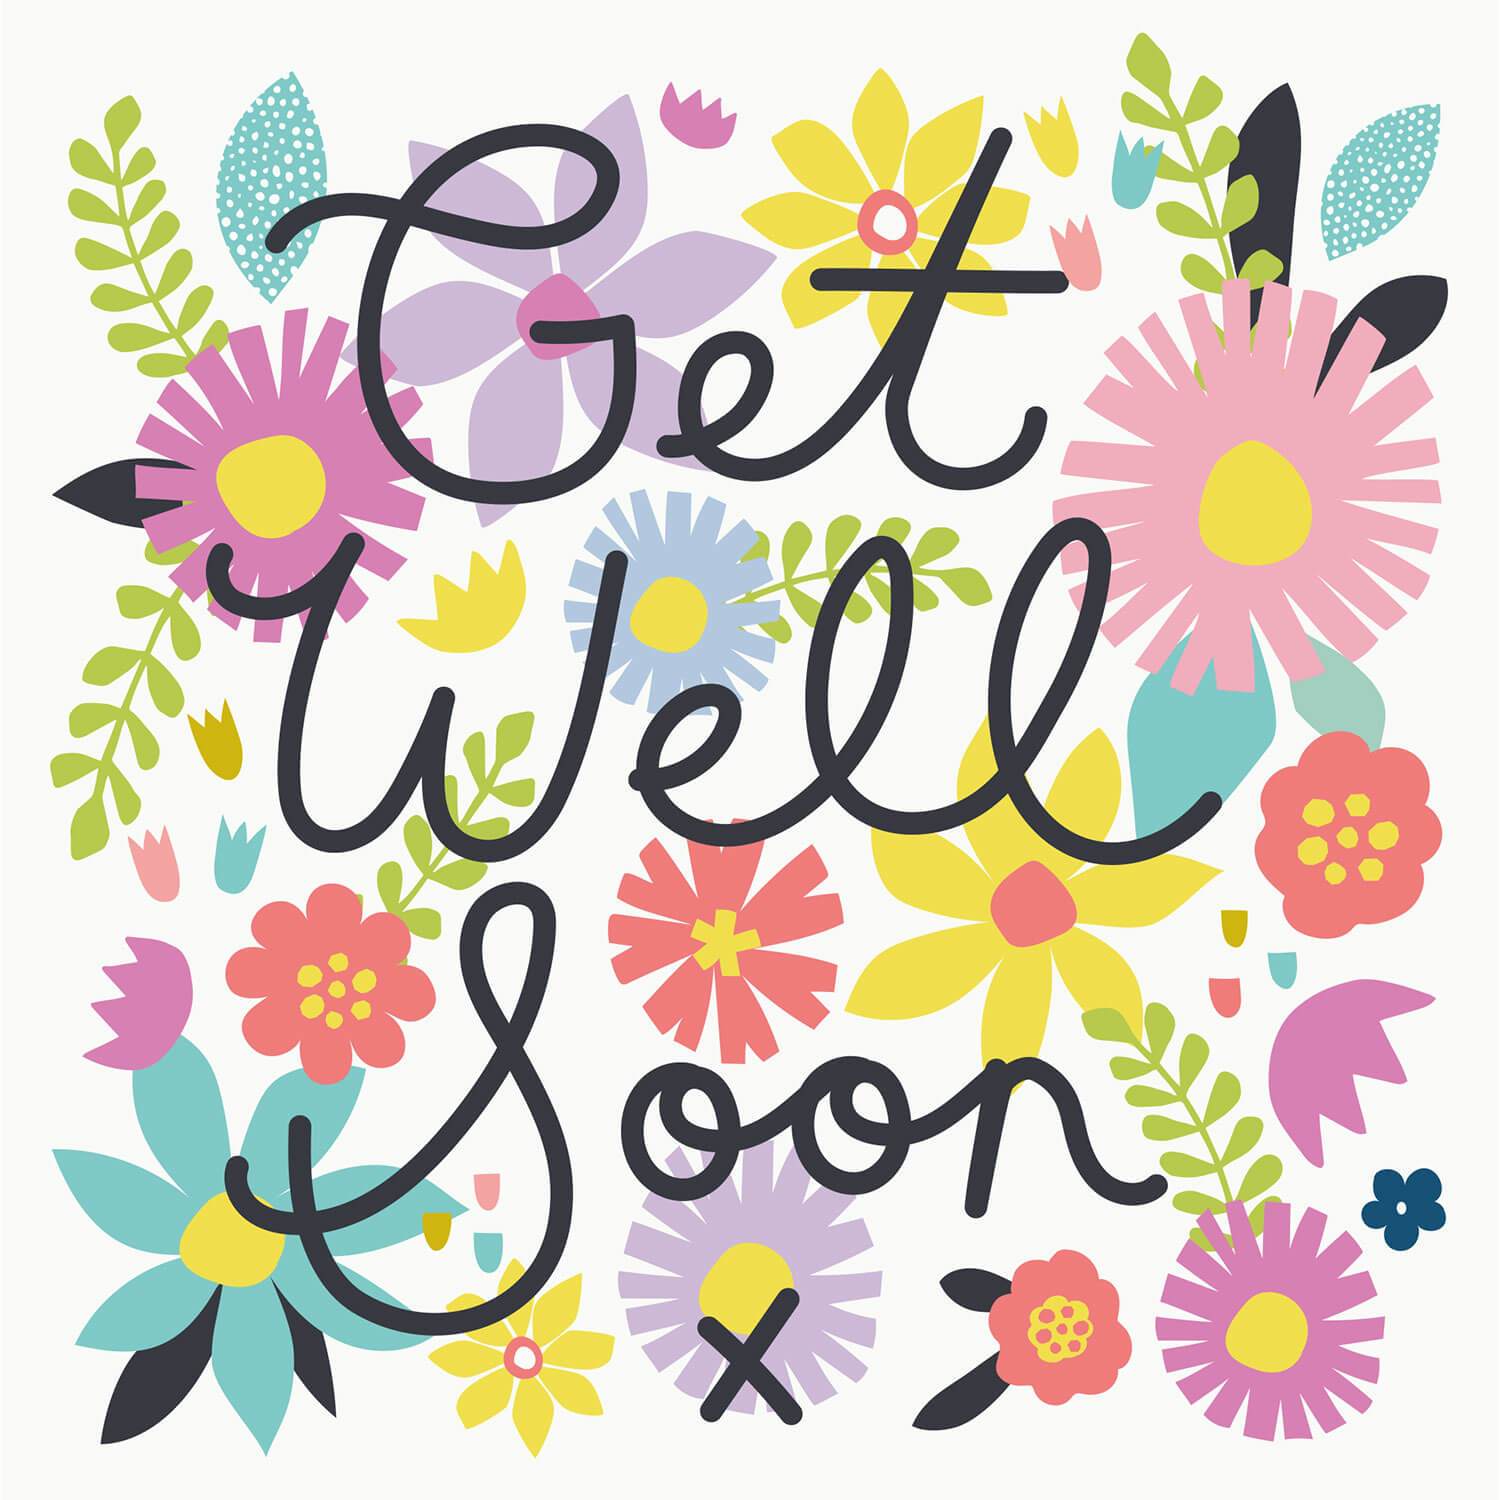 get well soon flowers clipart